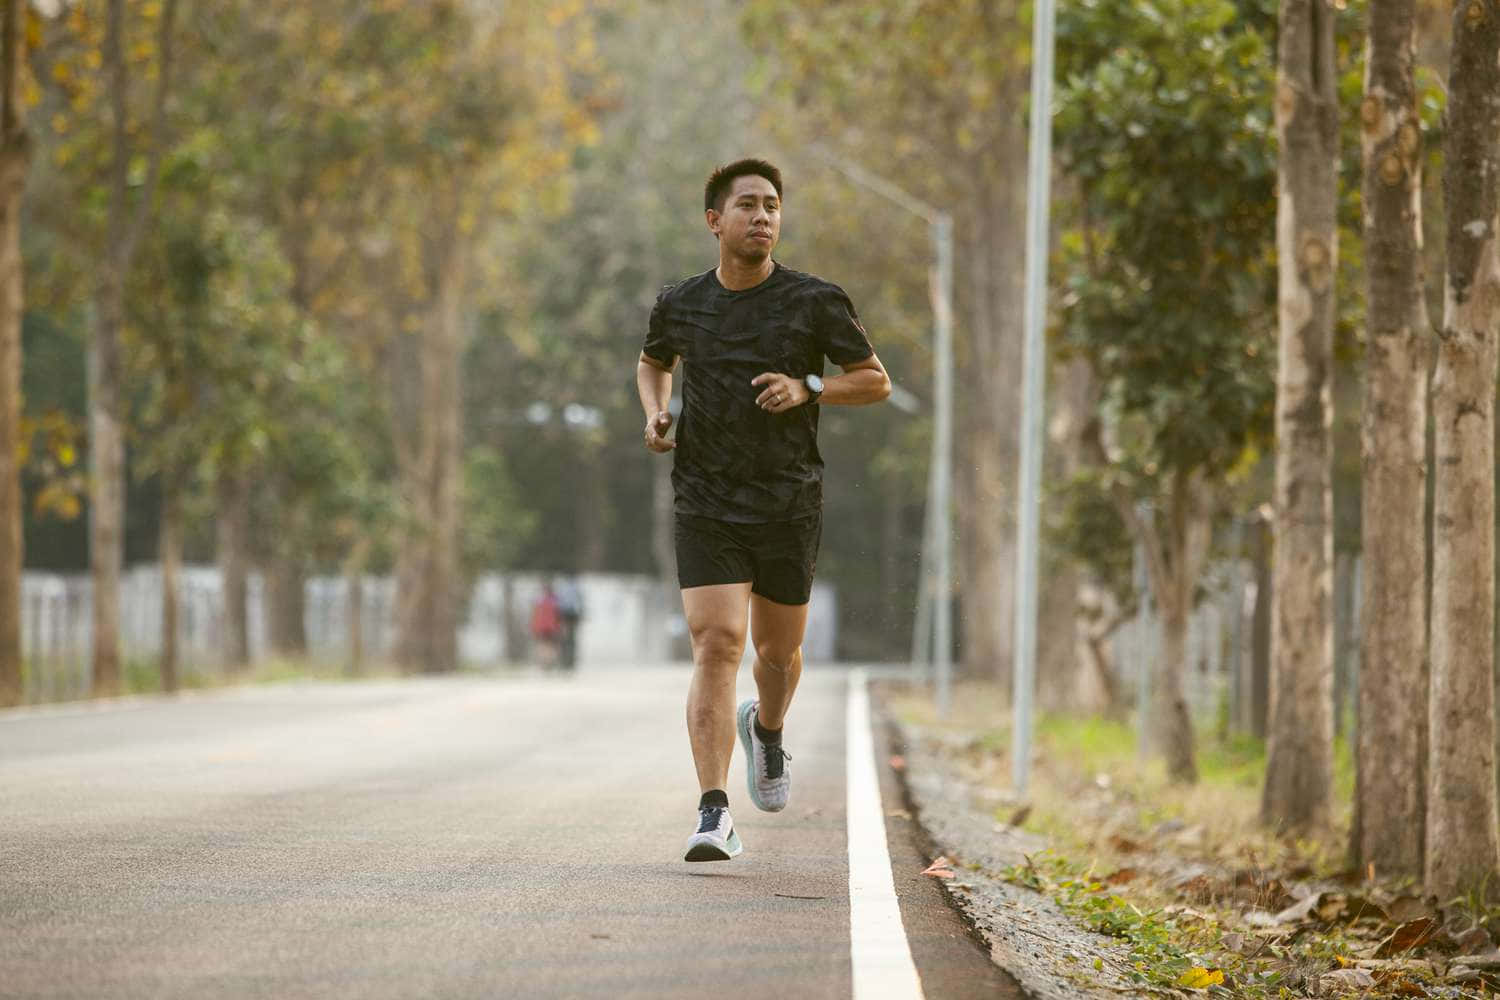 A Man Is Running On A Road In The Forest